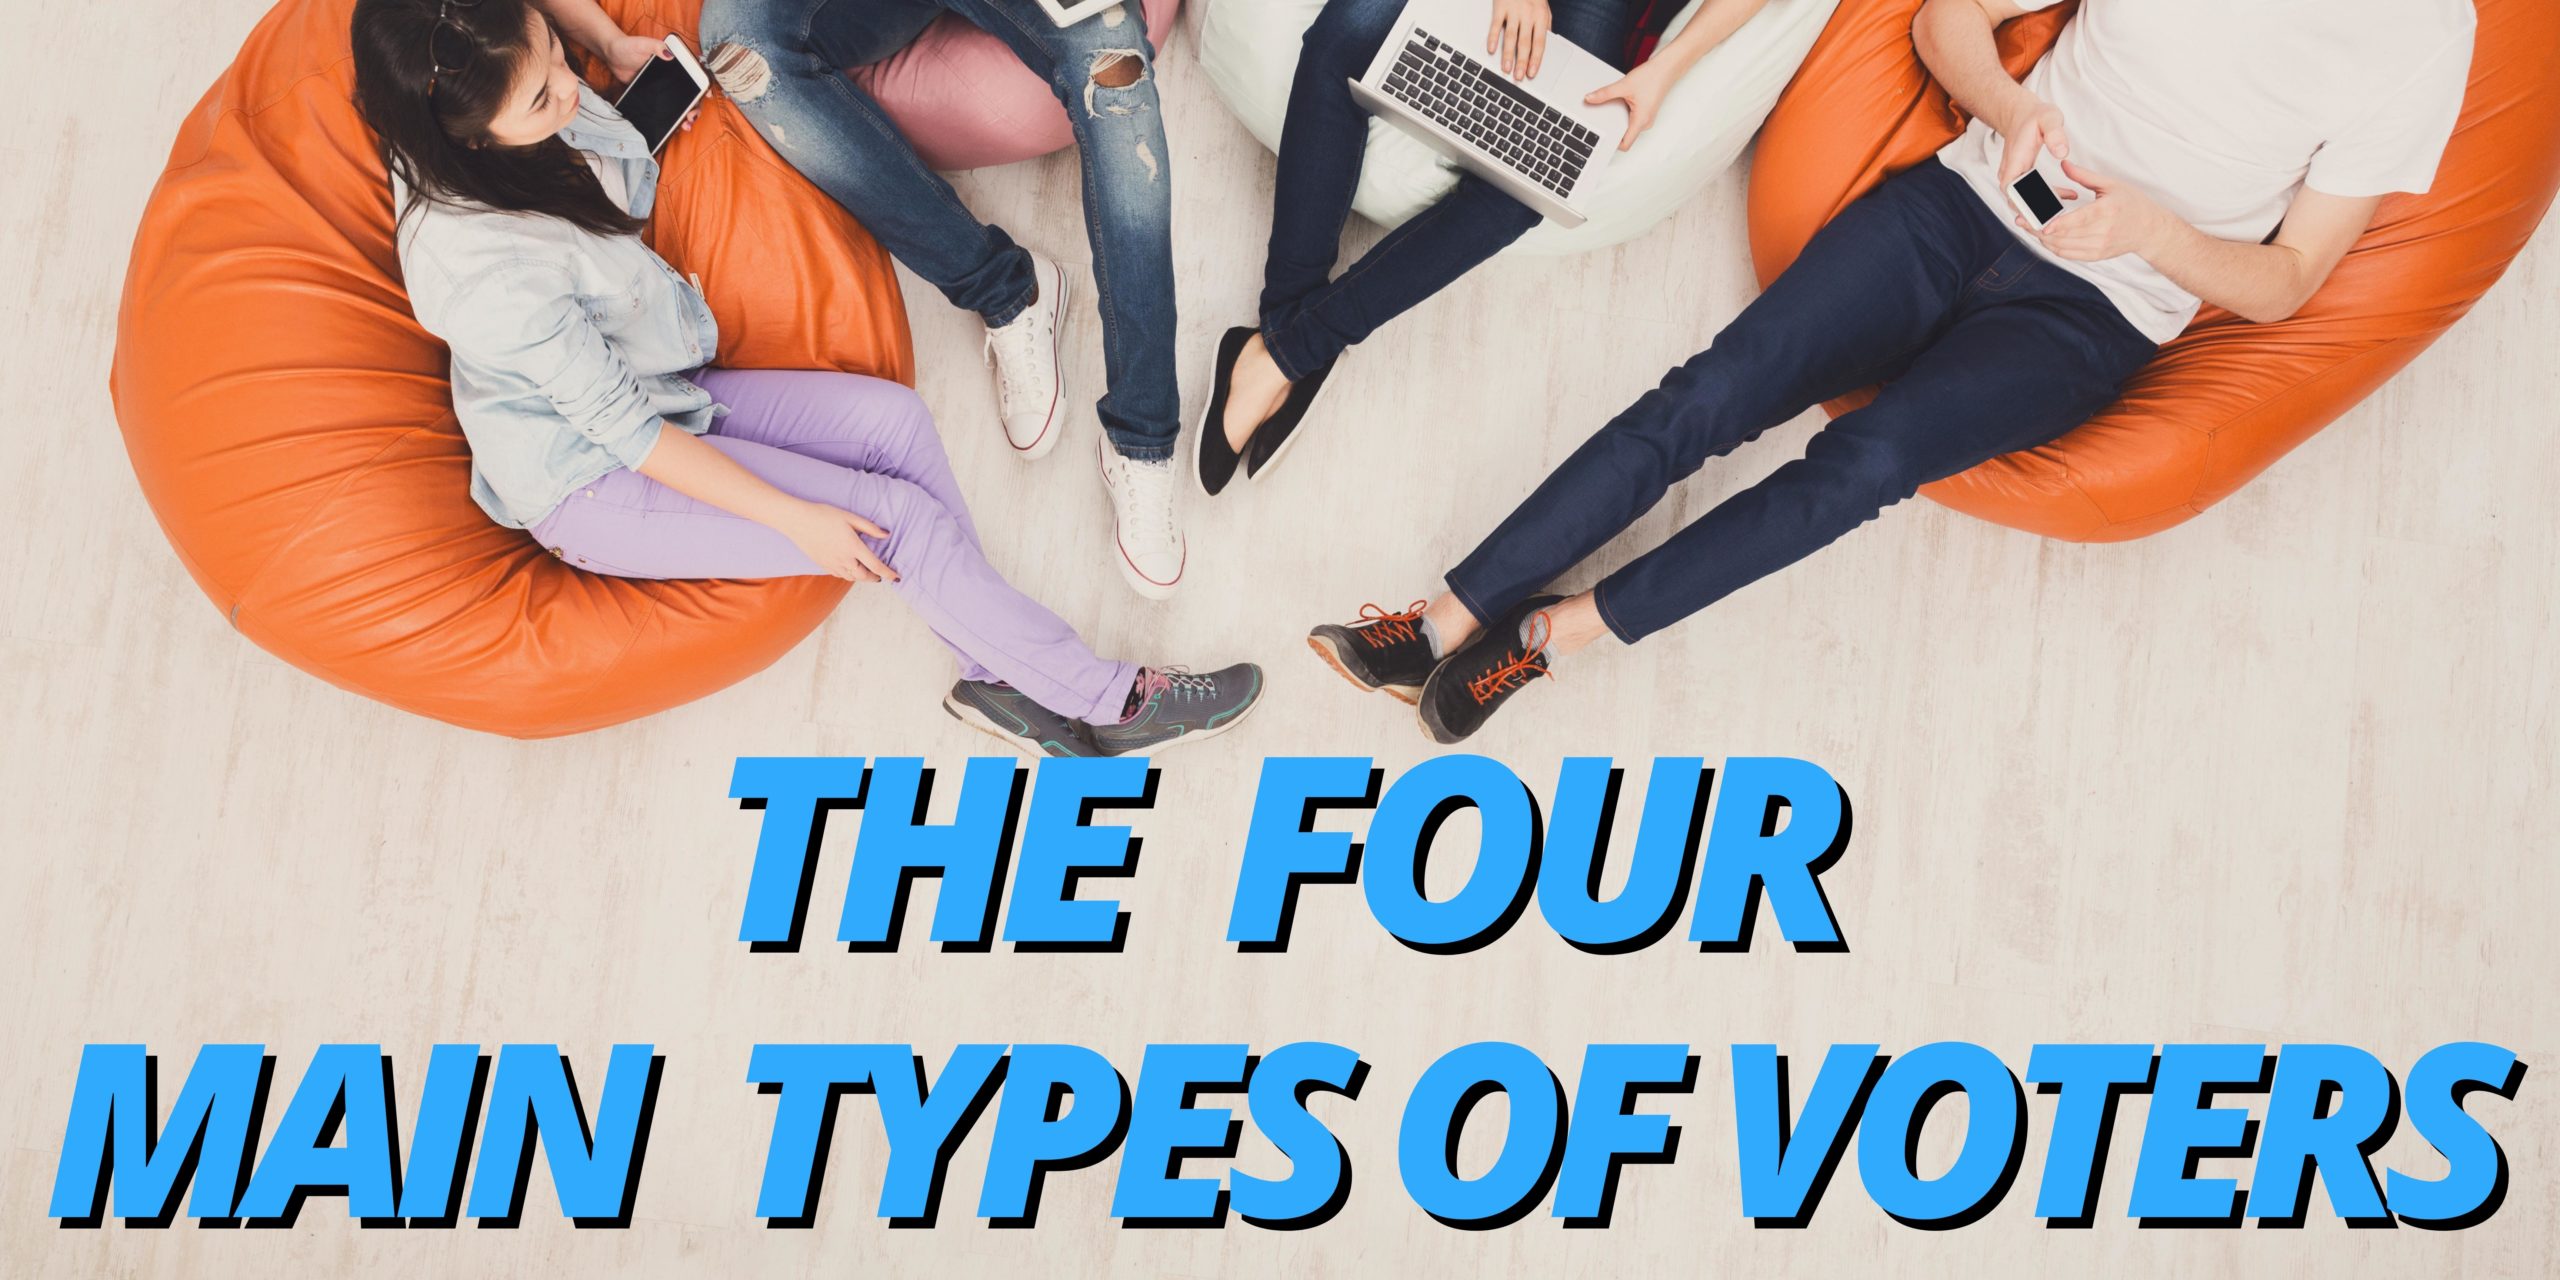 Types of voters